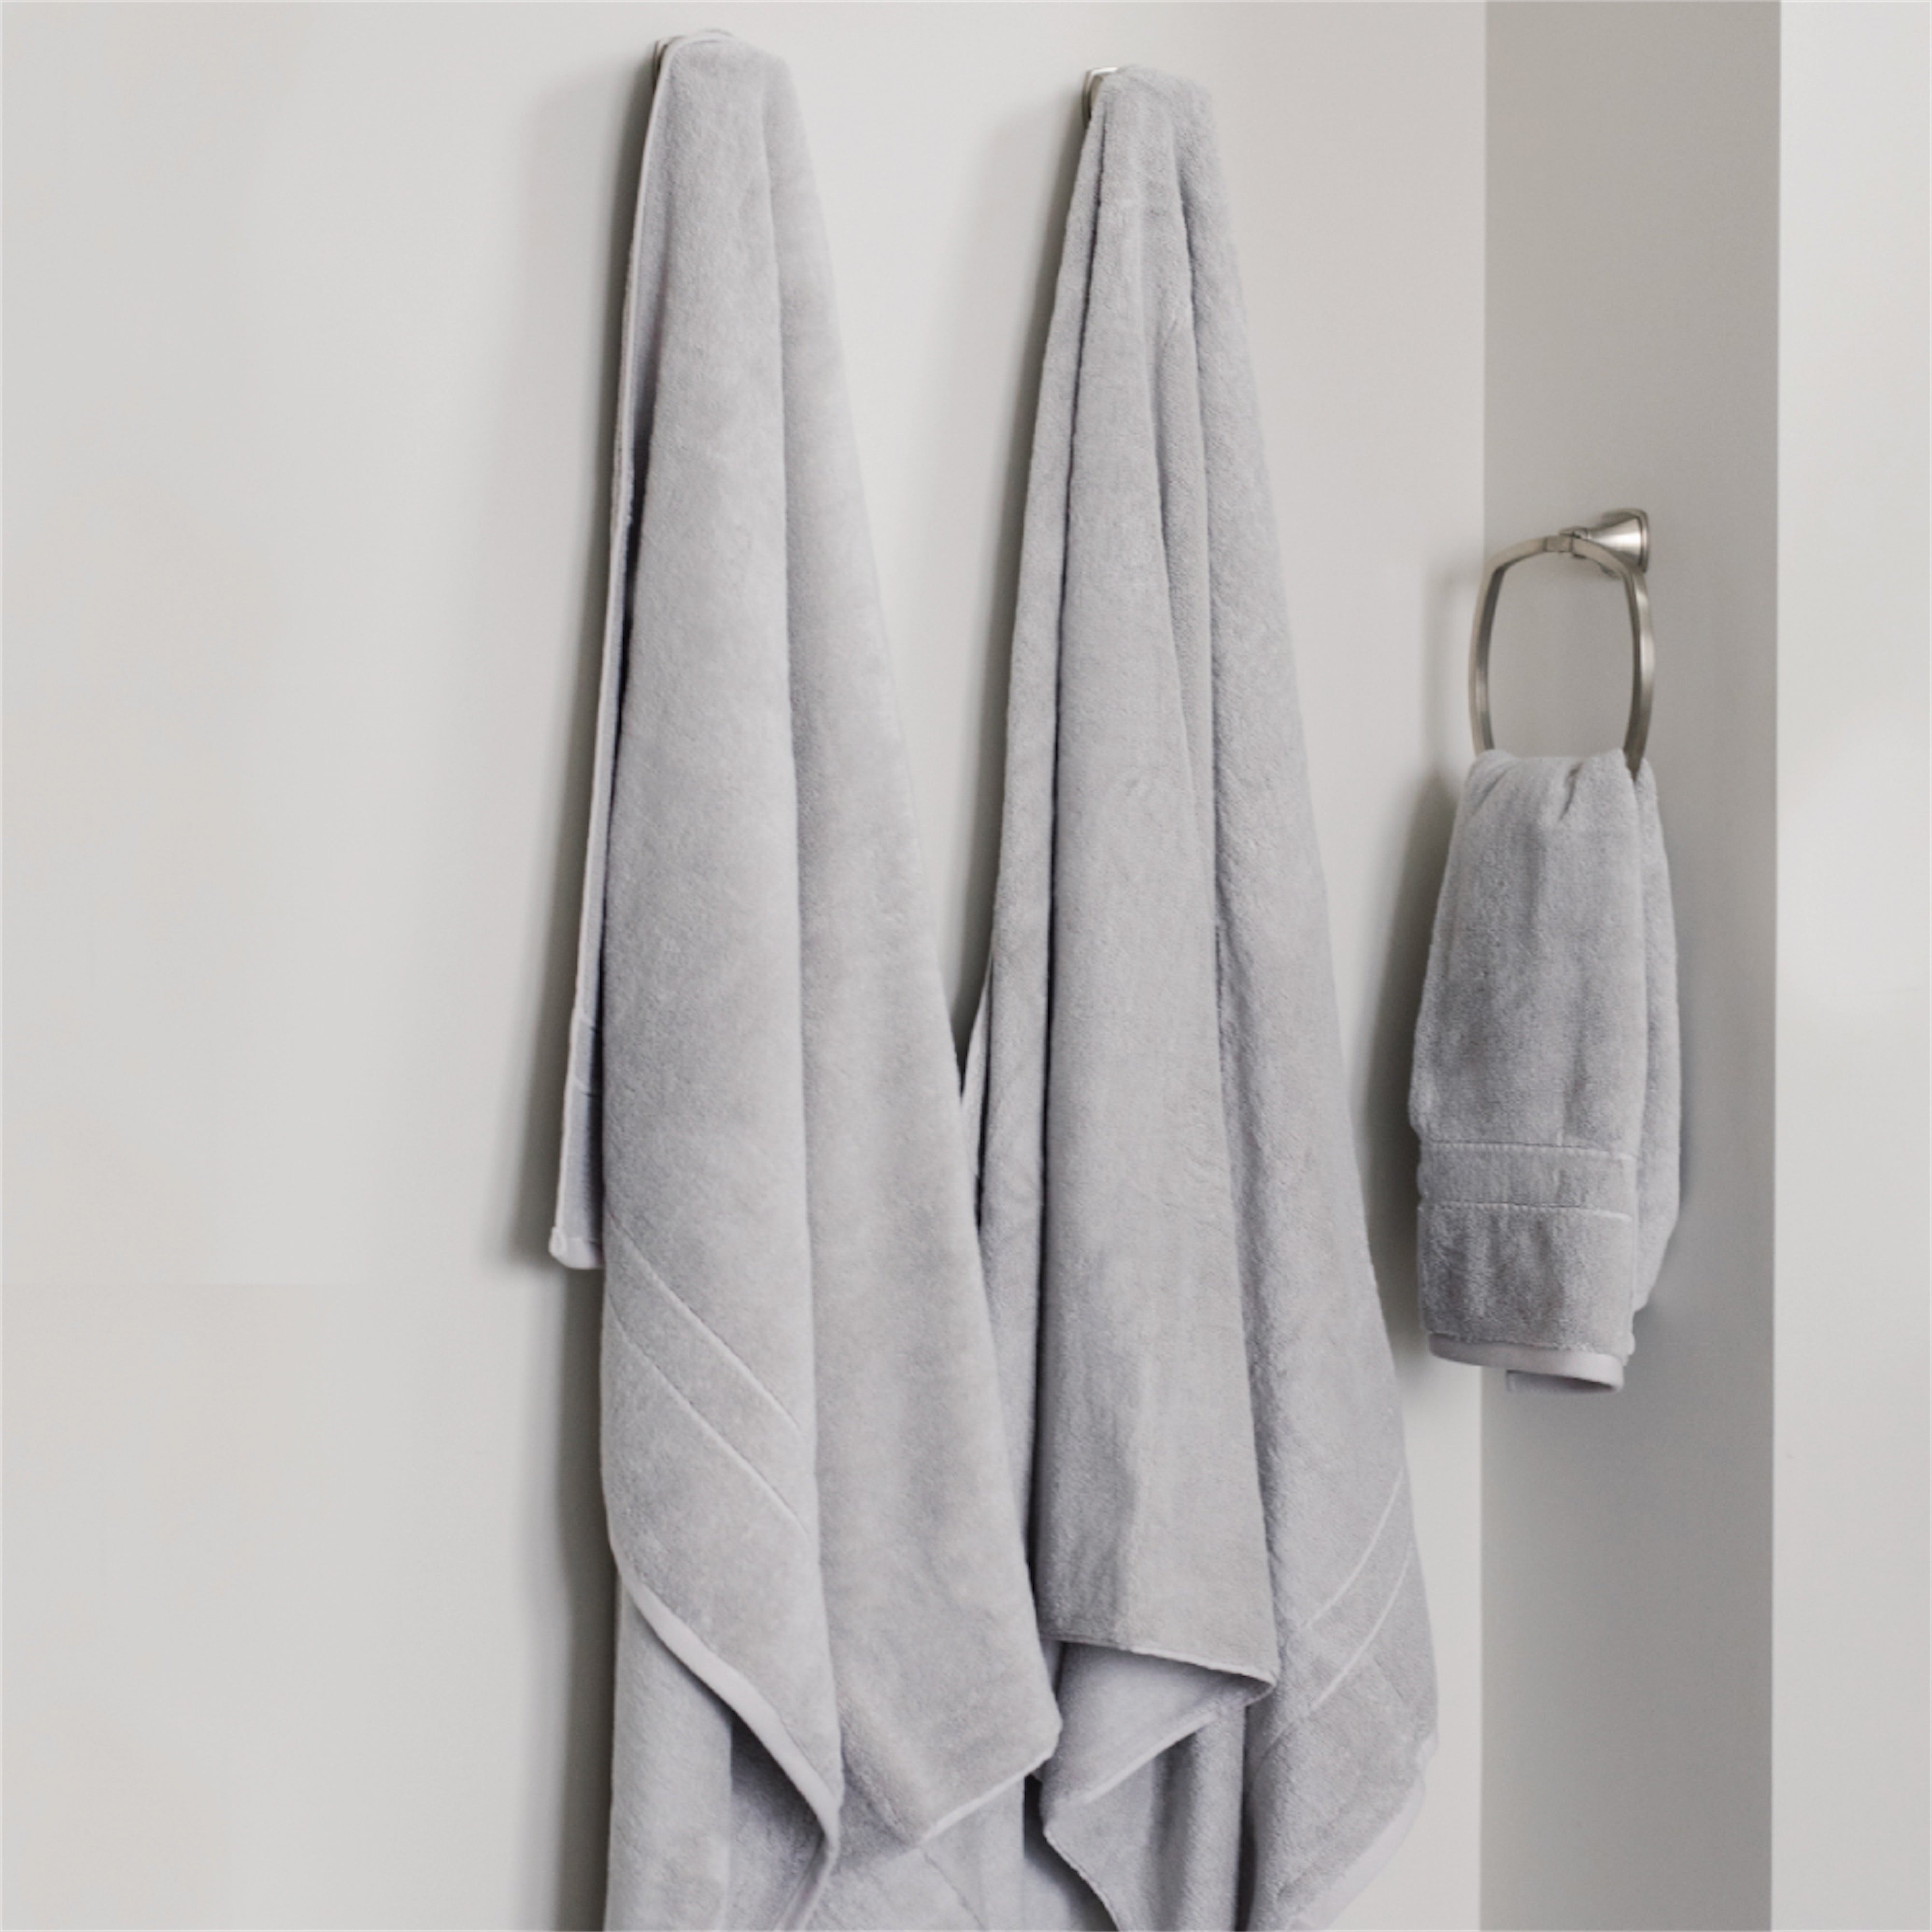 Premium Plush Bath Towels in the color Light Grey. Photo of Premium Plush Bath Towels taken in a bathroom showing the towels which are hung from a towel rack. |Color:Light Grey